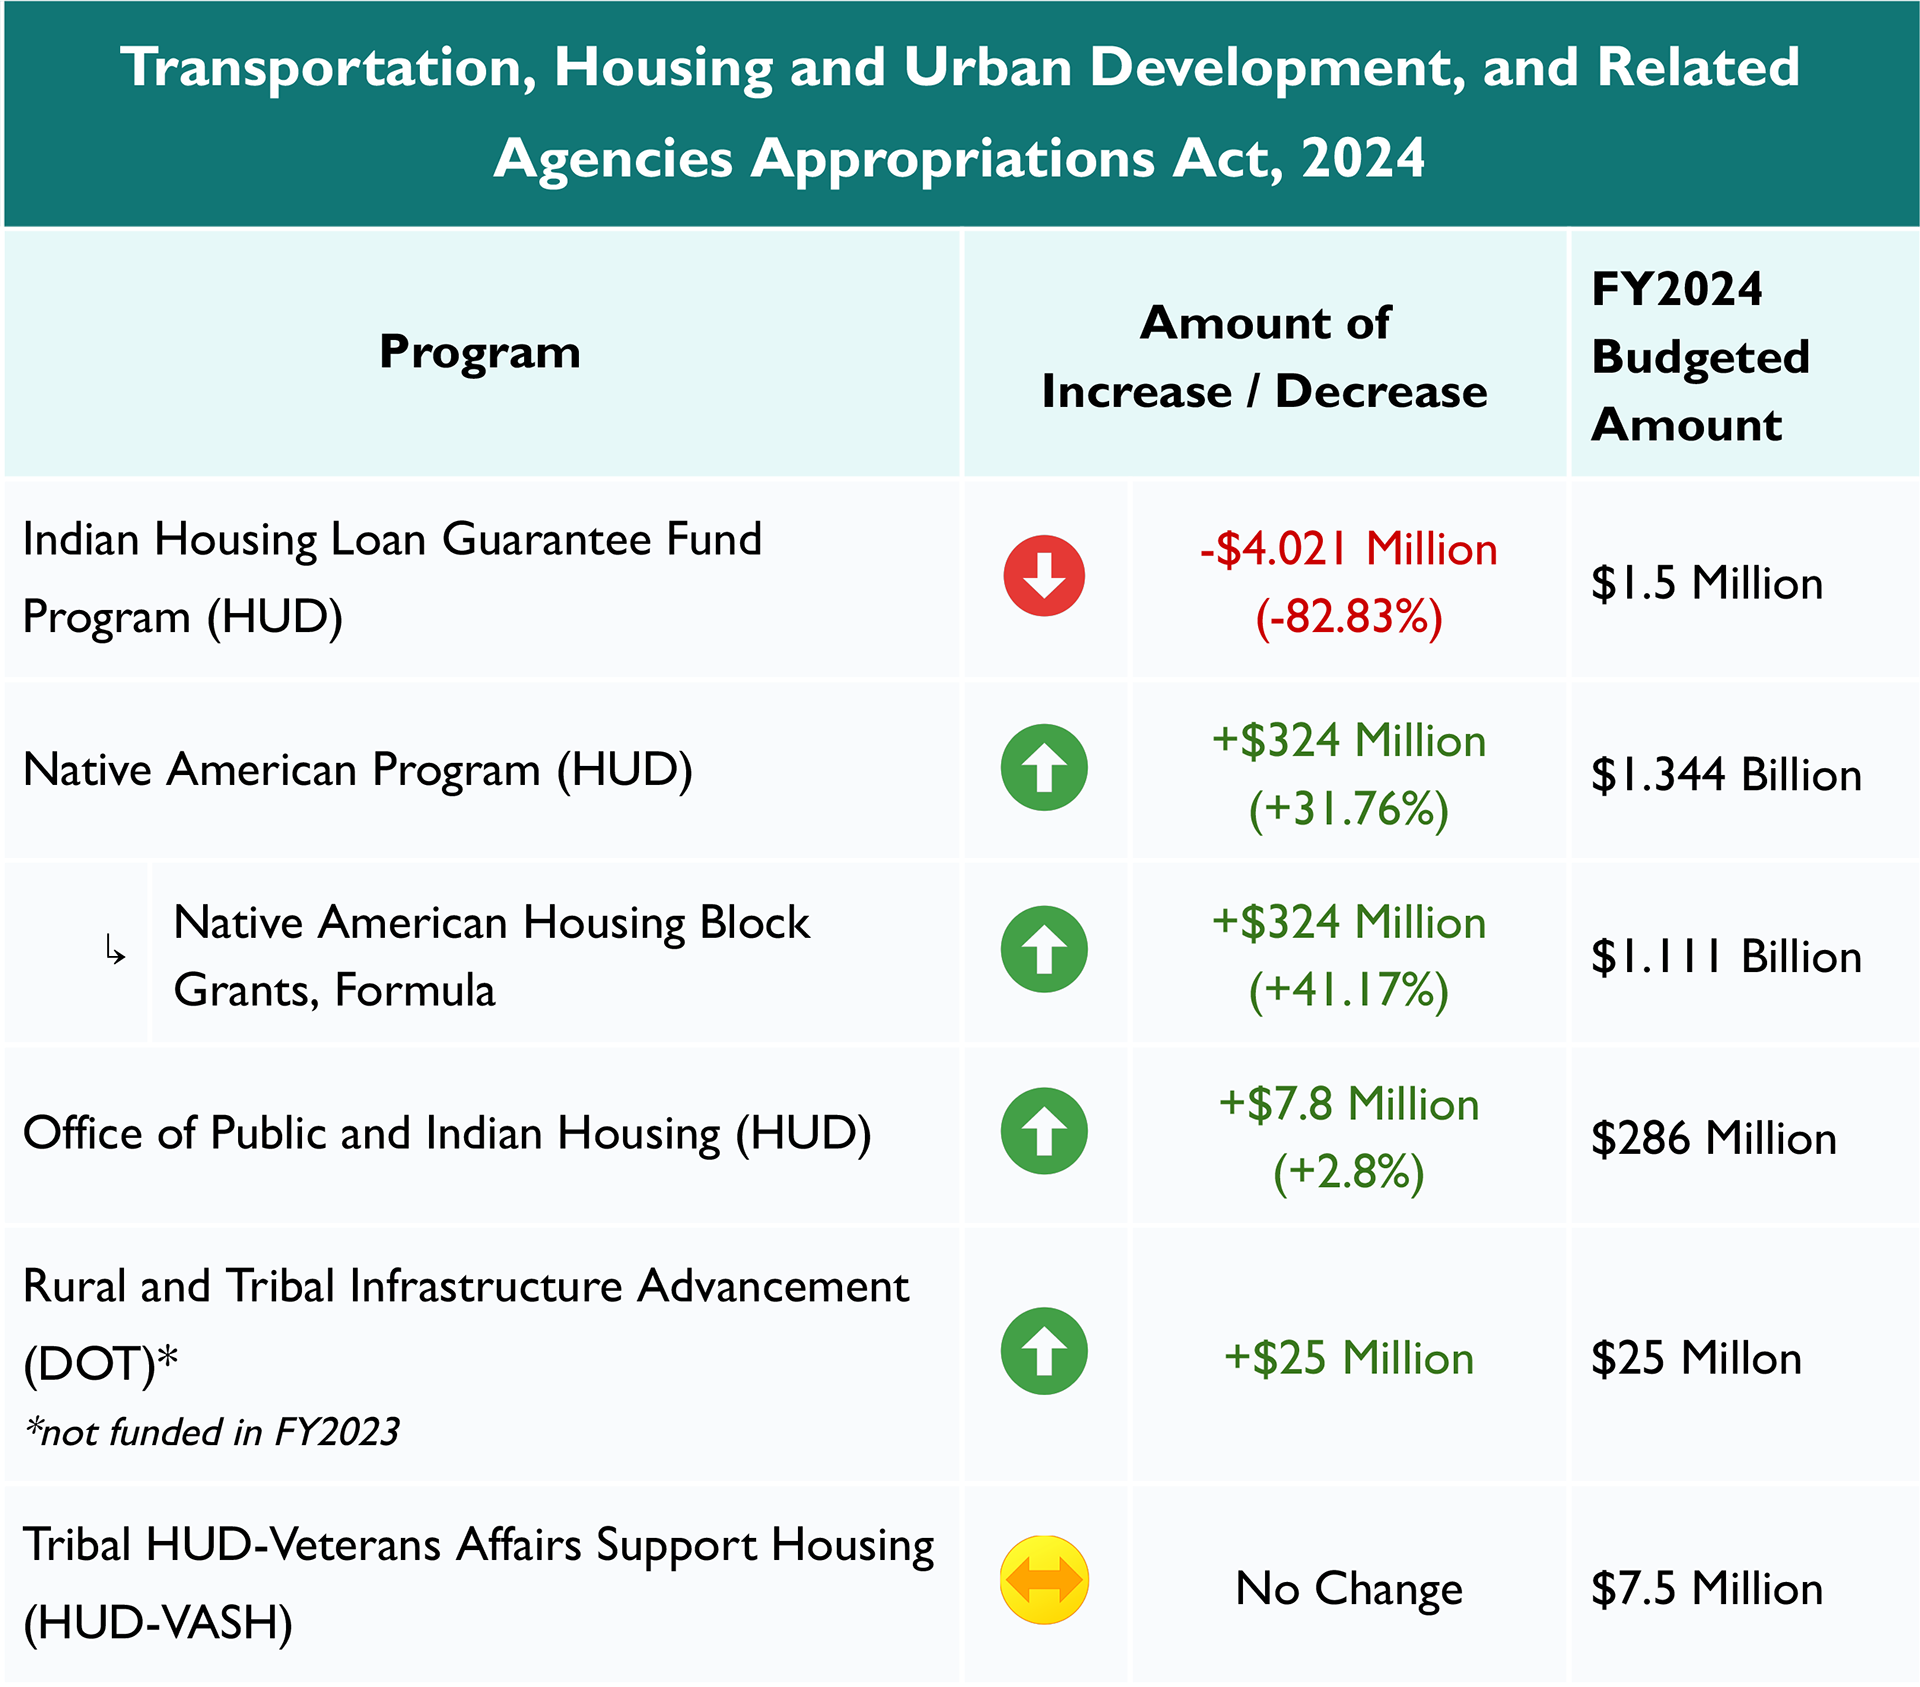 Transportation, Housing and Urban Development, and Related Agencies Appropriations Act, 2024